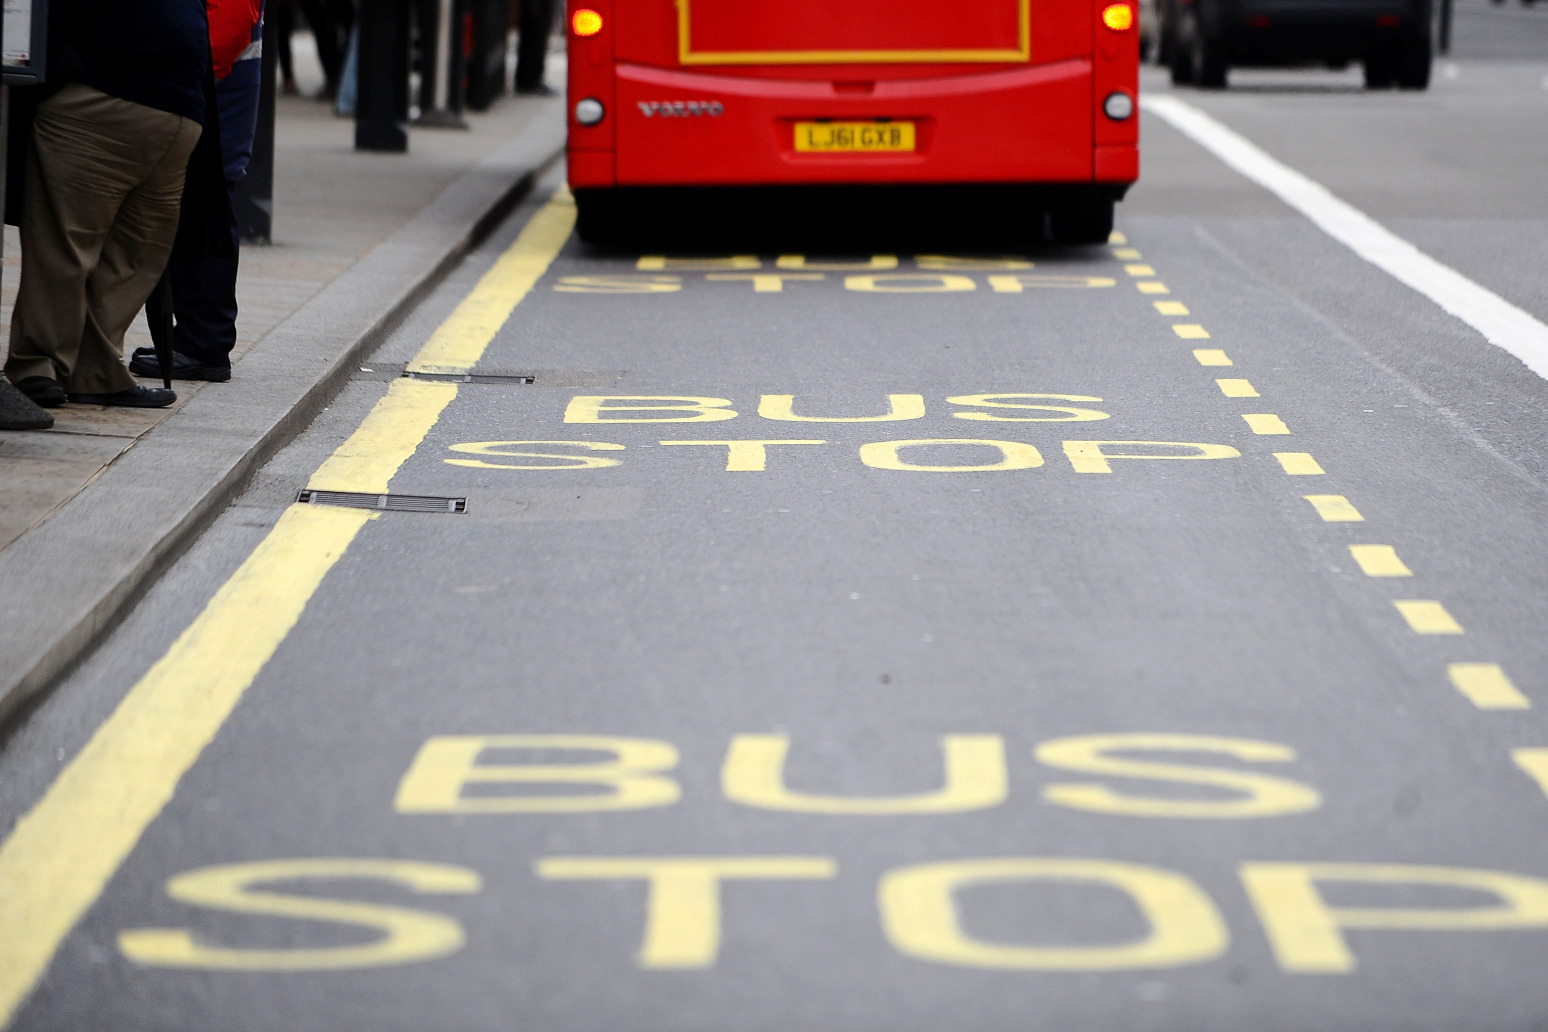 £2 cap on bus fares in England extended 